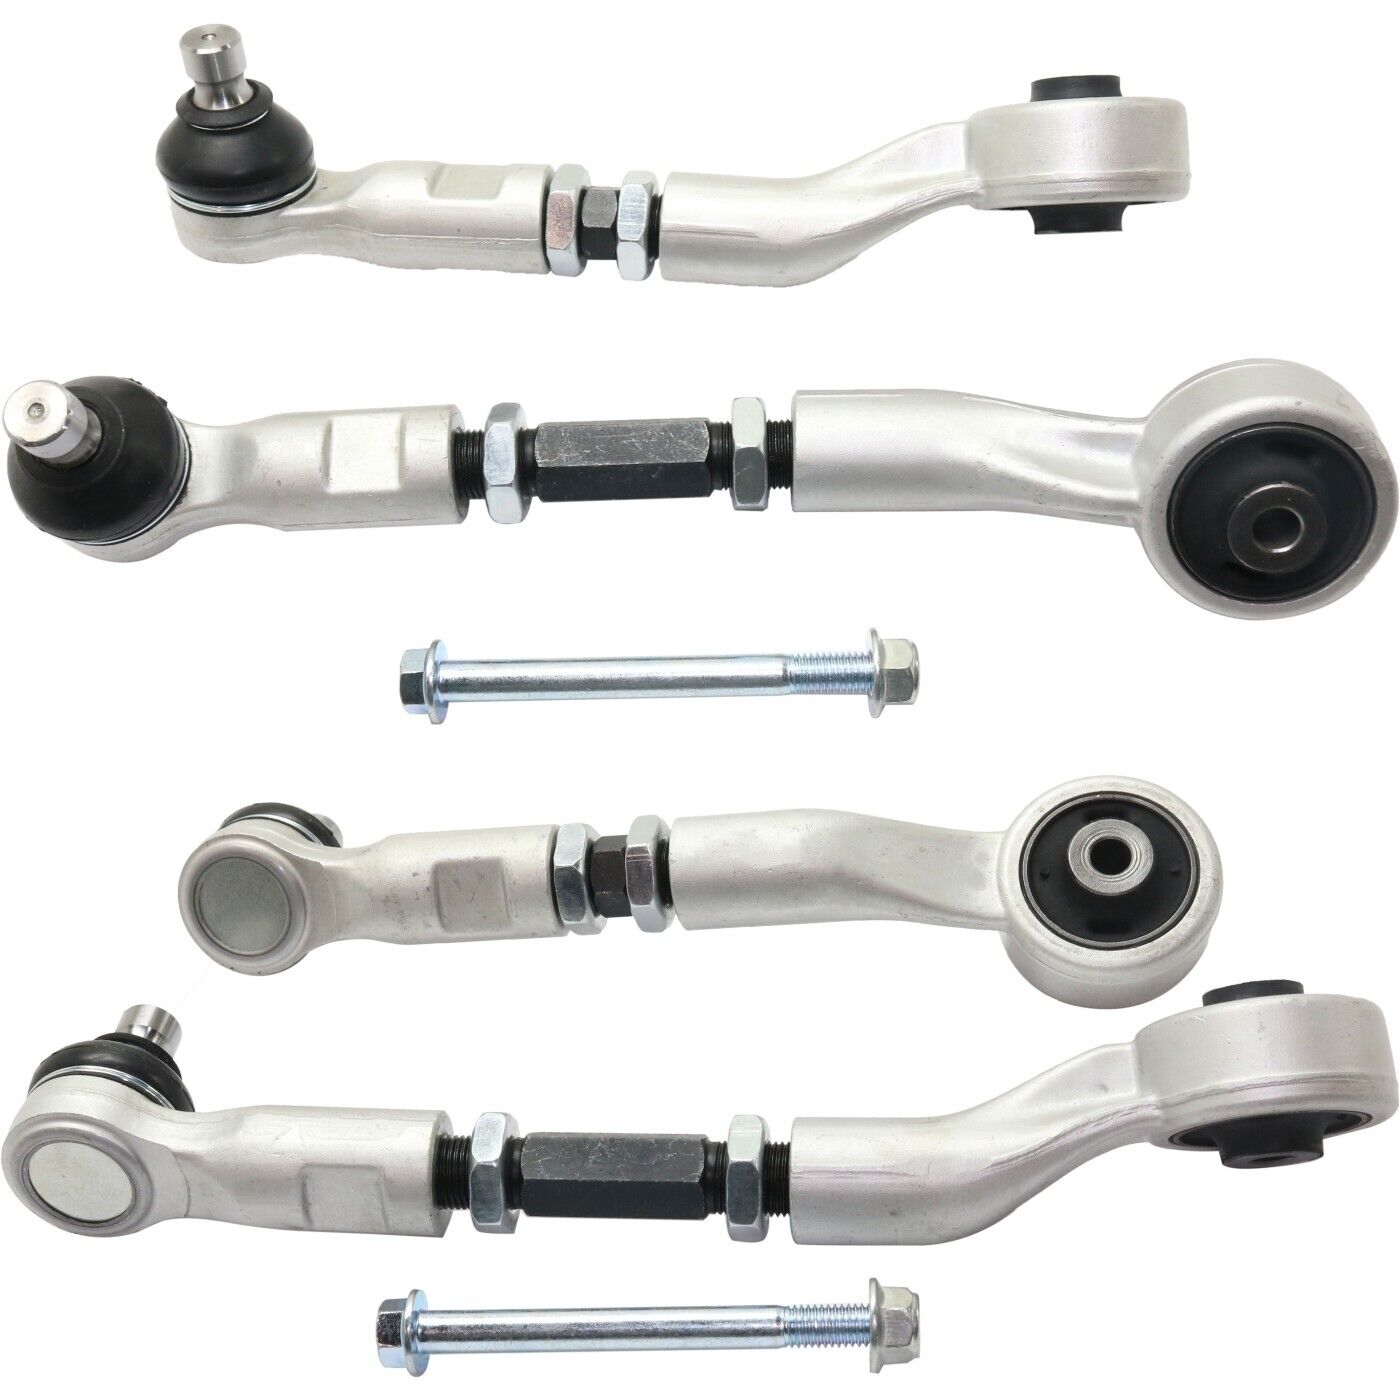 Control Arm Adjustable For 2009-17 Audi Q5 Front Upper Frontward and Rearward